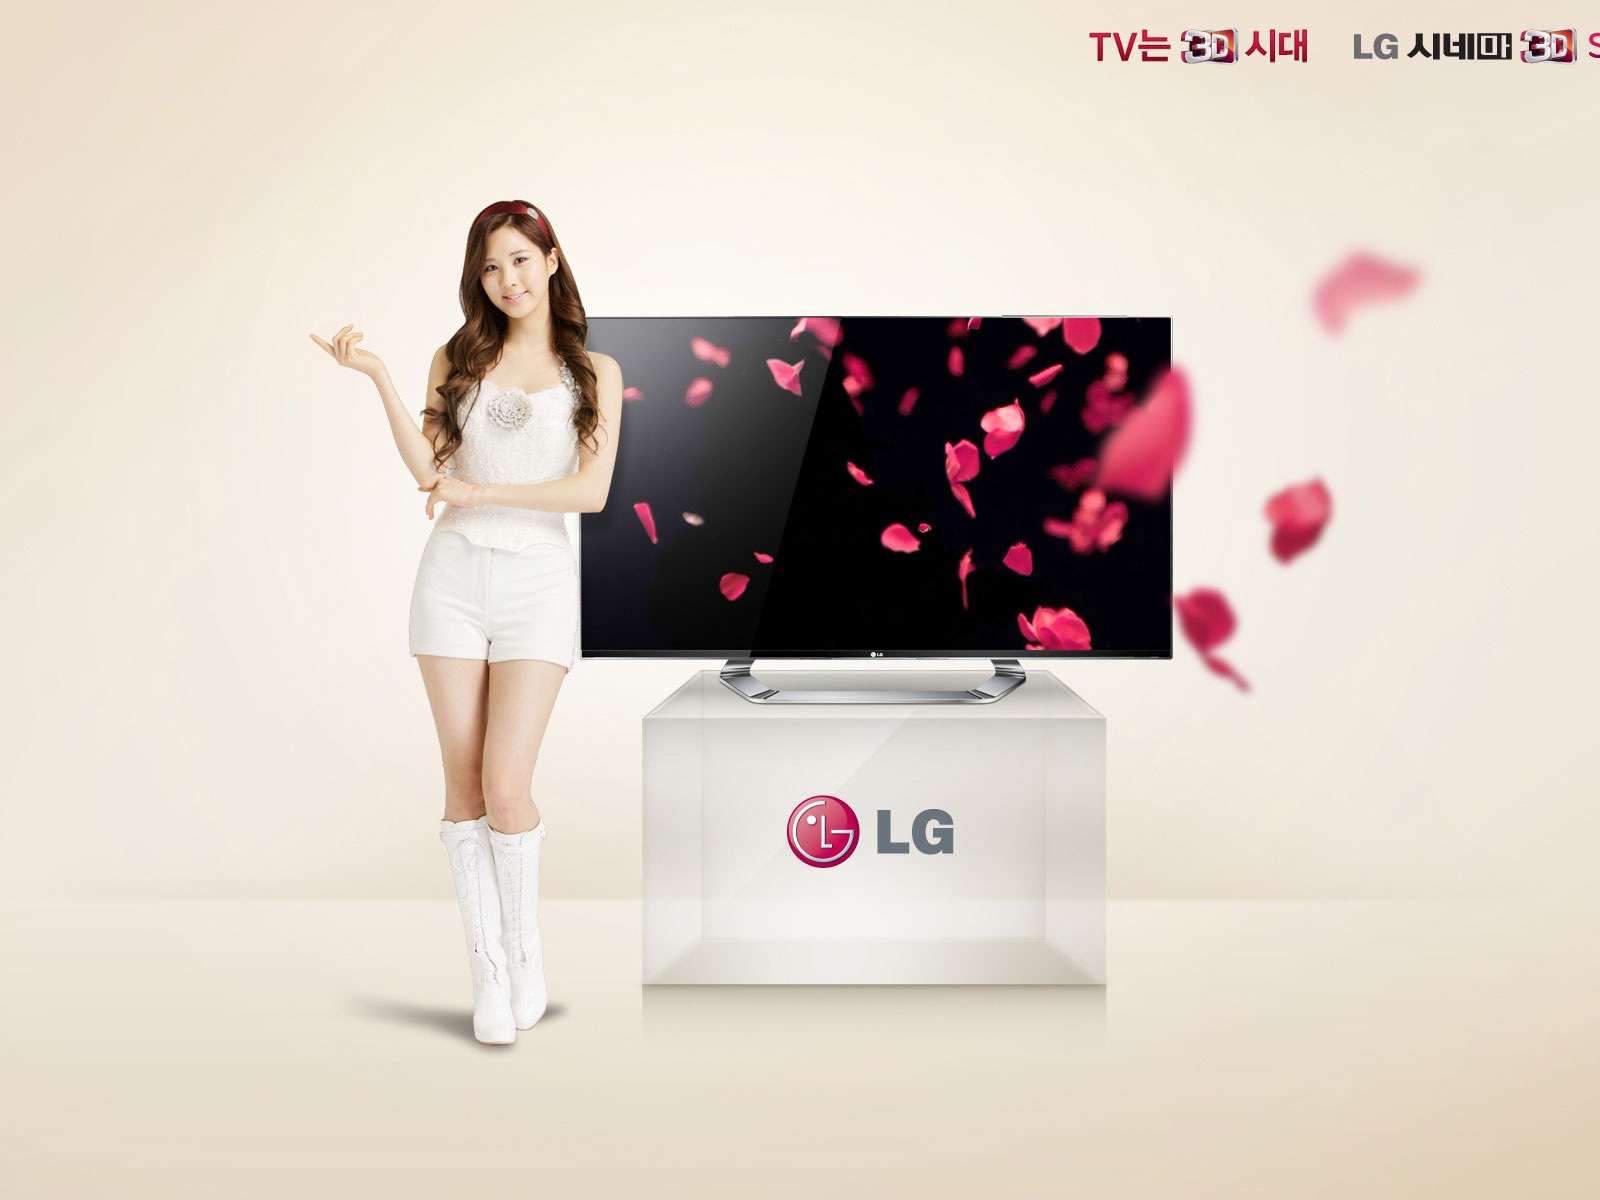 Girls Generation ACE and LG endorsements ads HD wallpapers #16 - 1600x1200